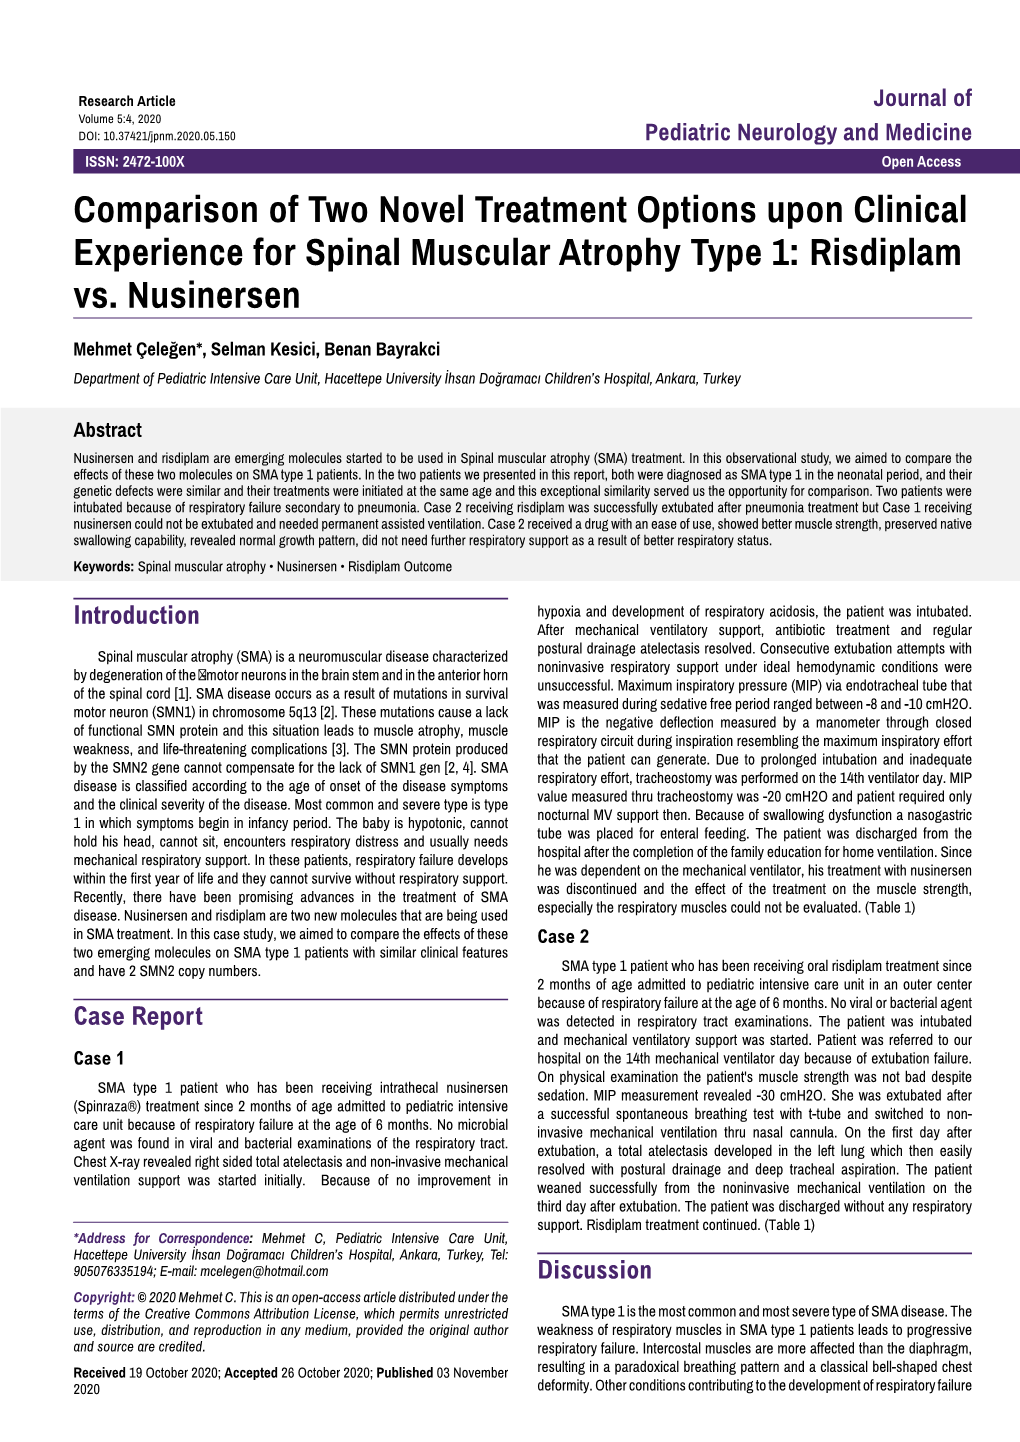 Comparison of Two Novel Treatment Options Upon Clinical Experience for Spinal Muscular Atrophy Type 1: Risdiplam Vs